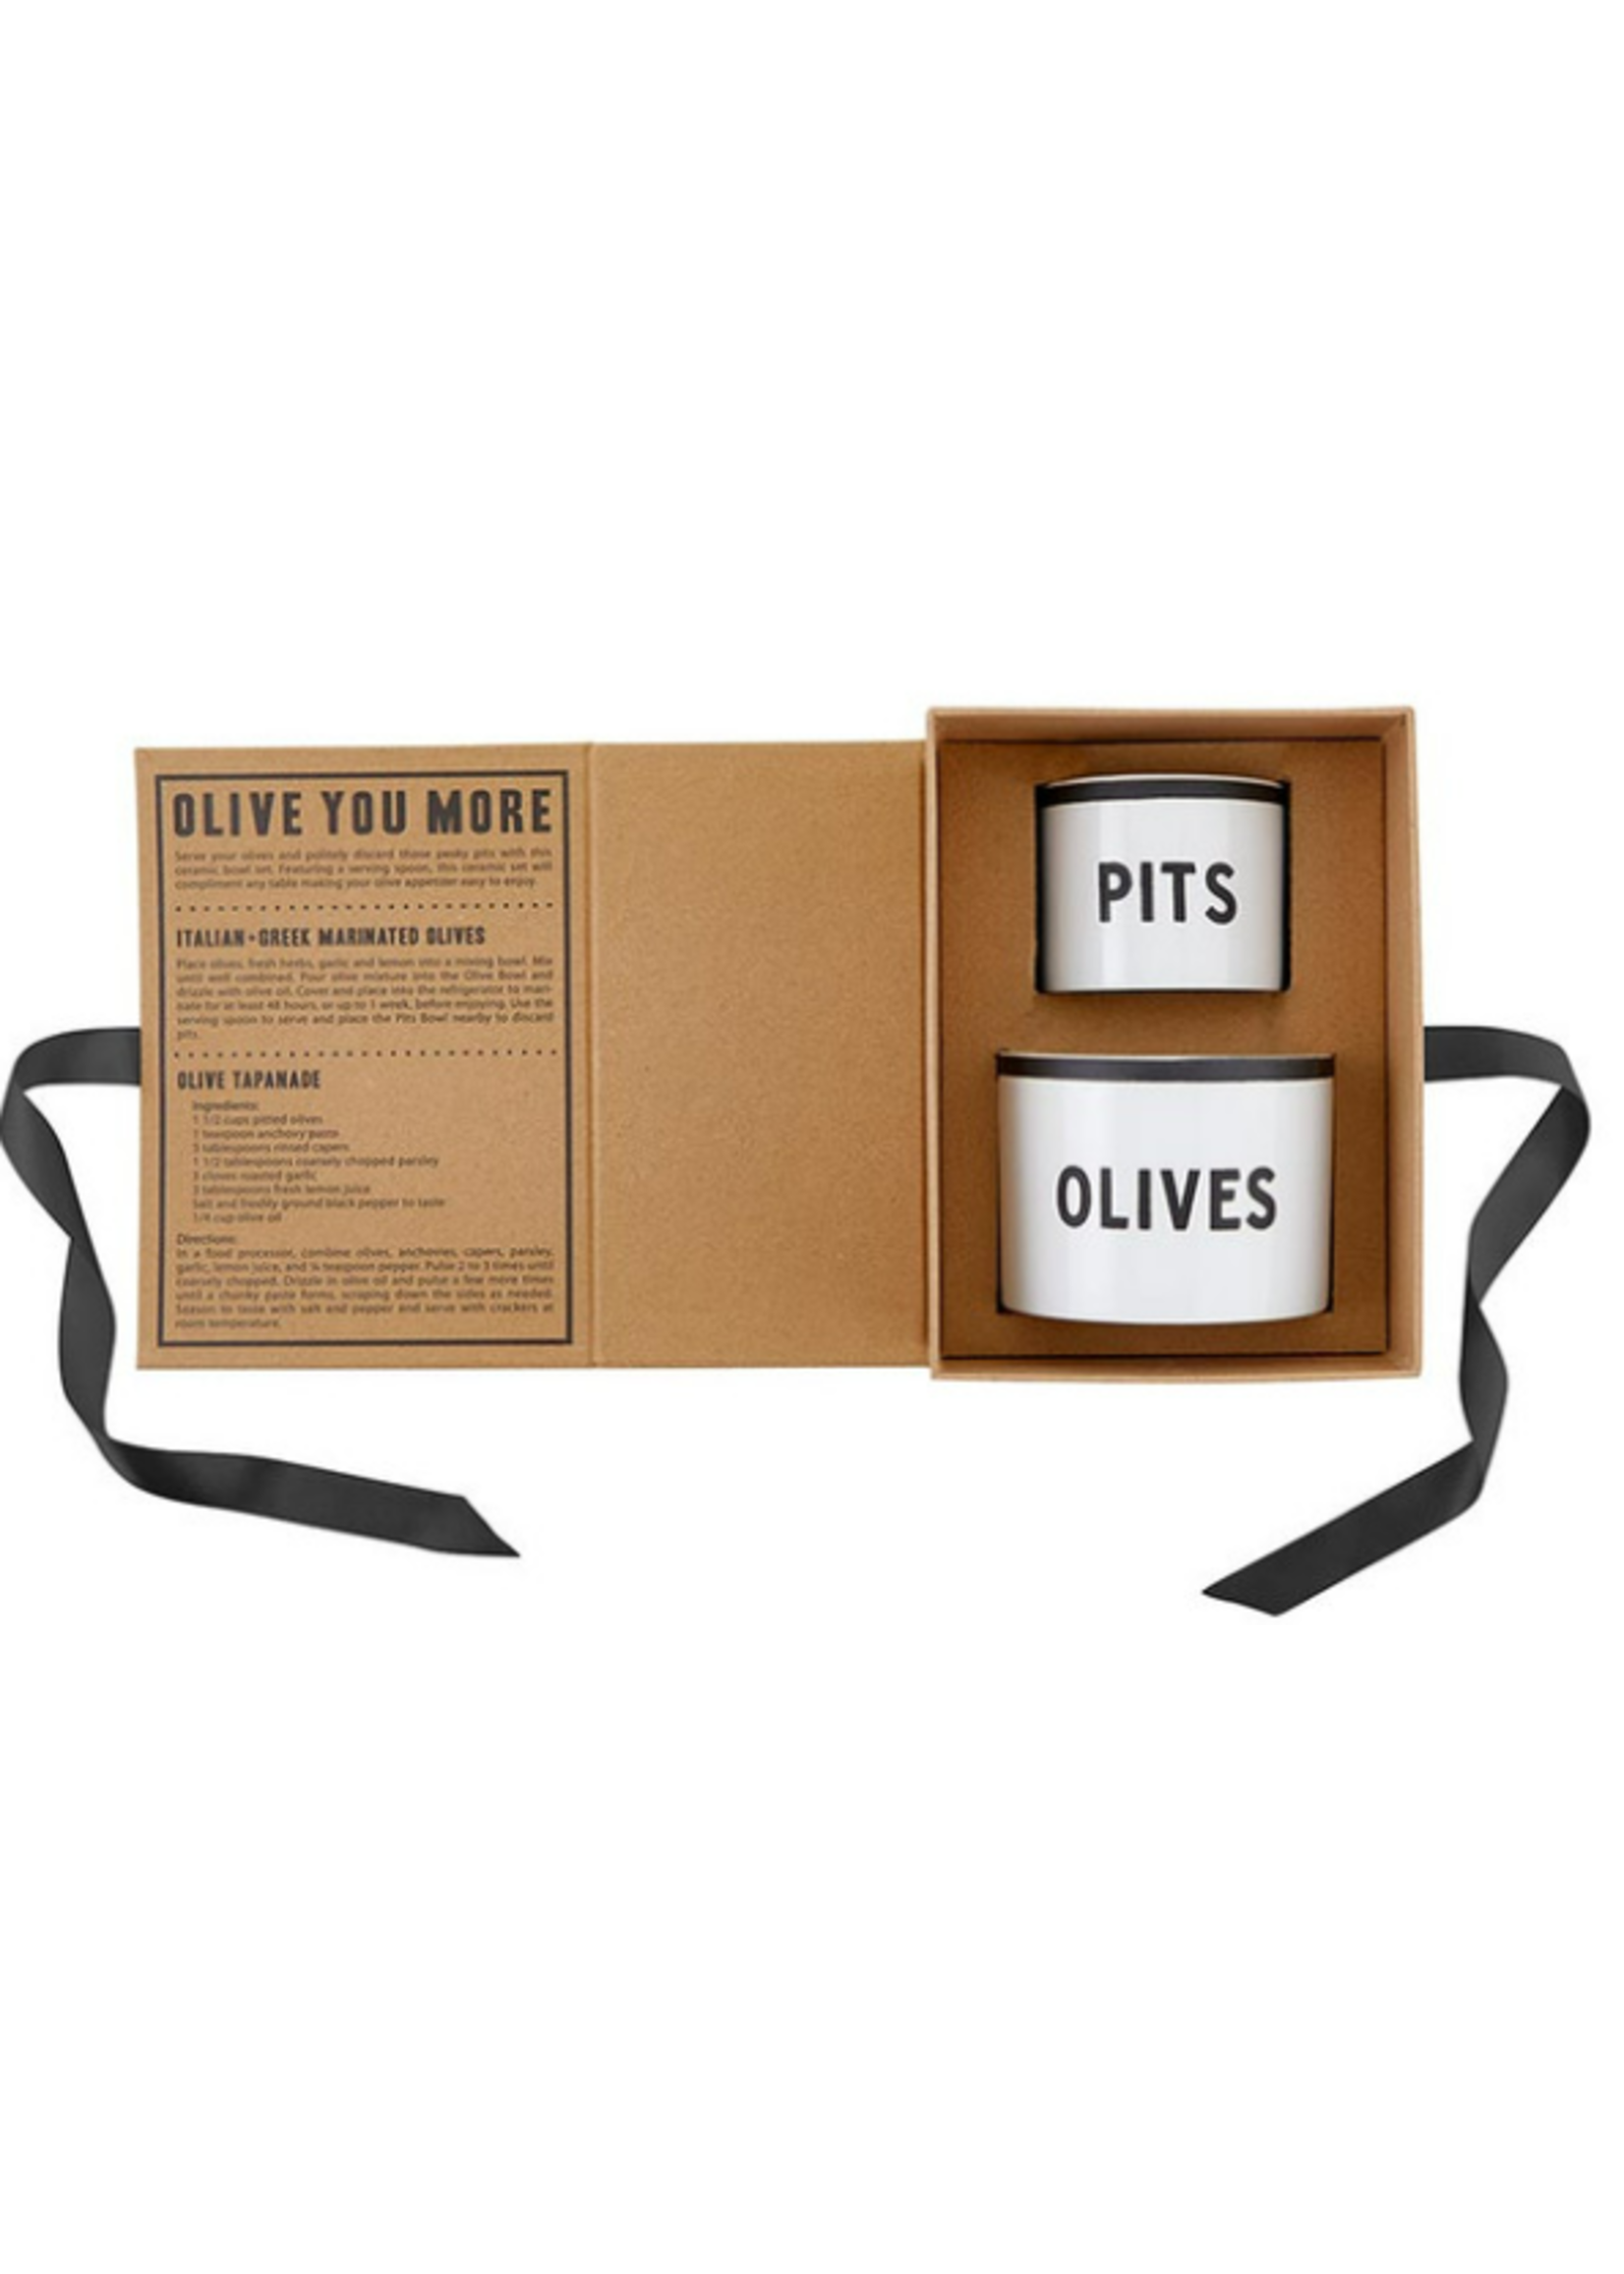 Creative Brands Olive & Pits Bowls Book Box